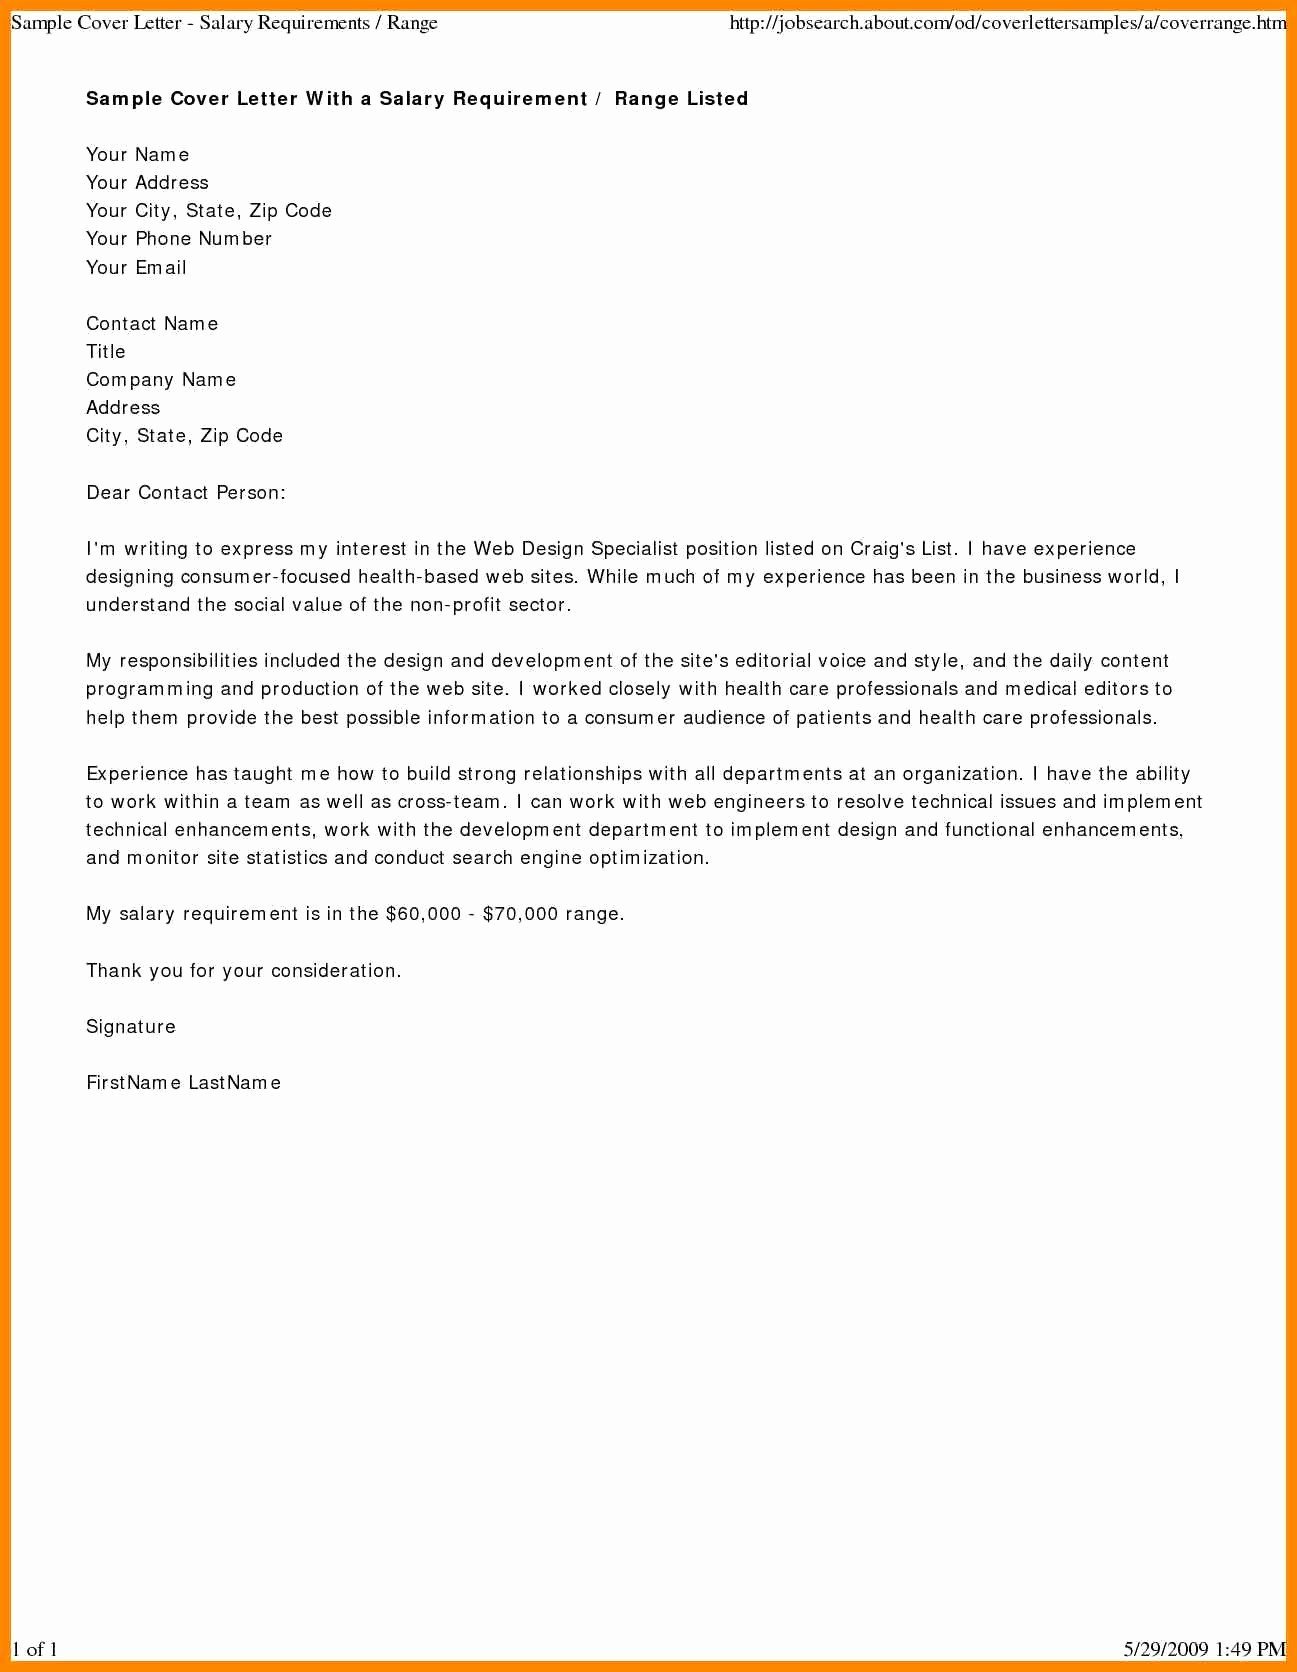 Past Due Invoice Letter Template - Lovely Past Due Invoice Letter Template